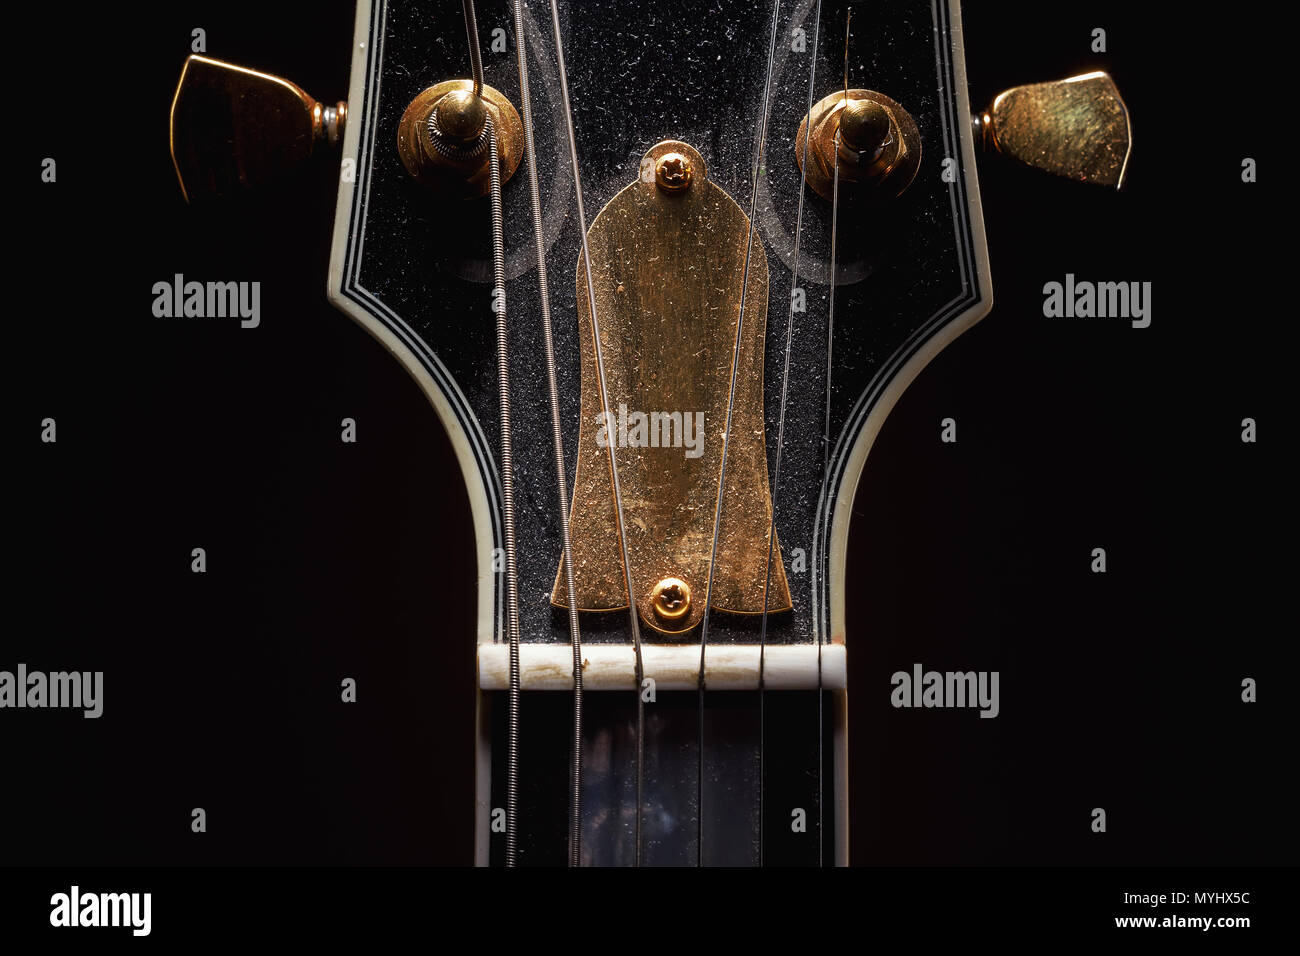 Details of an old dusty electric guitar. Stock Photo